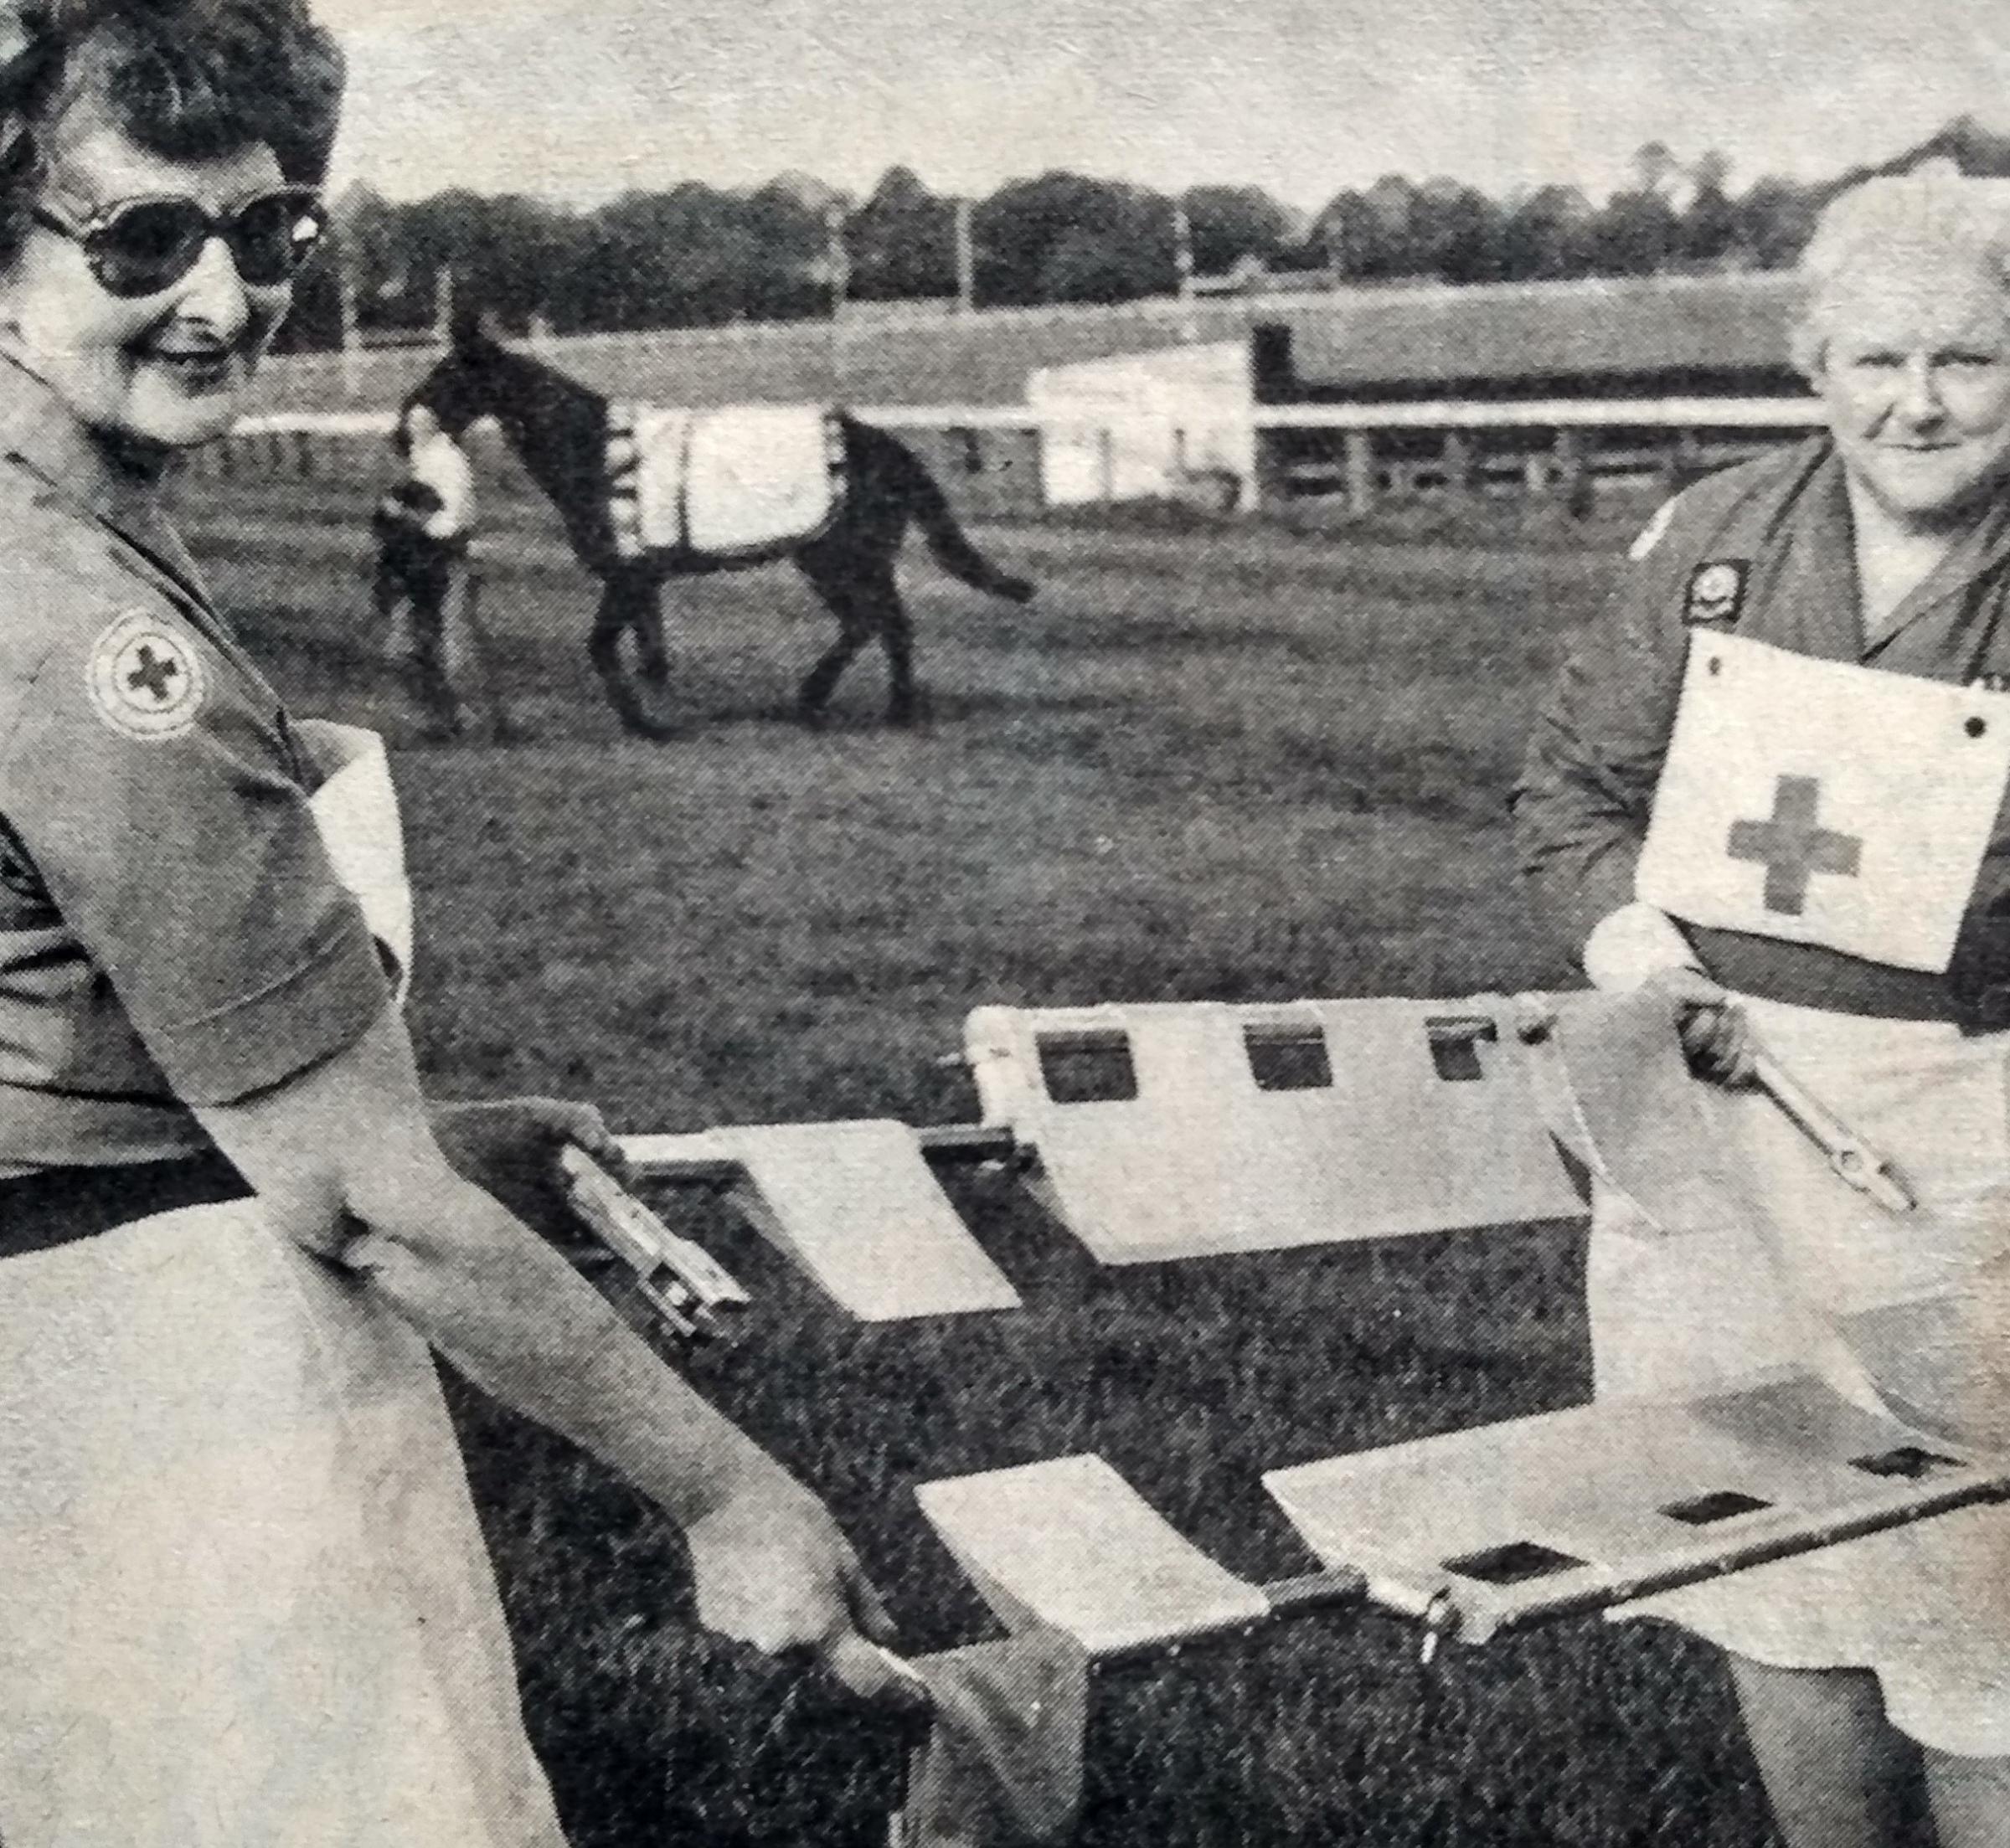 State-of-the-art first aid in October 1977. Ann Nethcoat and Iris Fooks, of No 24 detachment British Red Cross